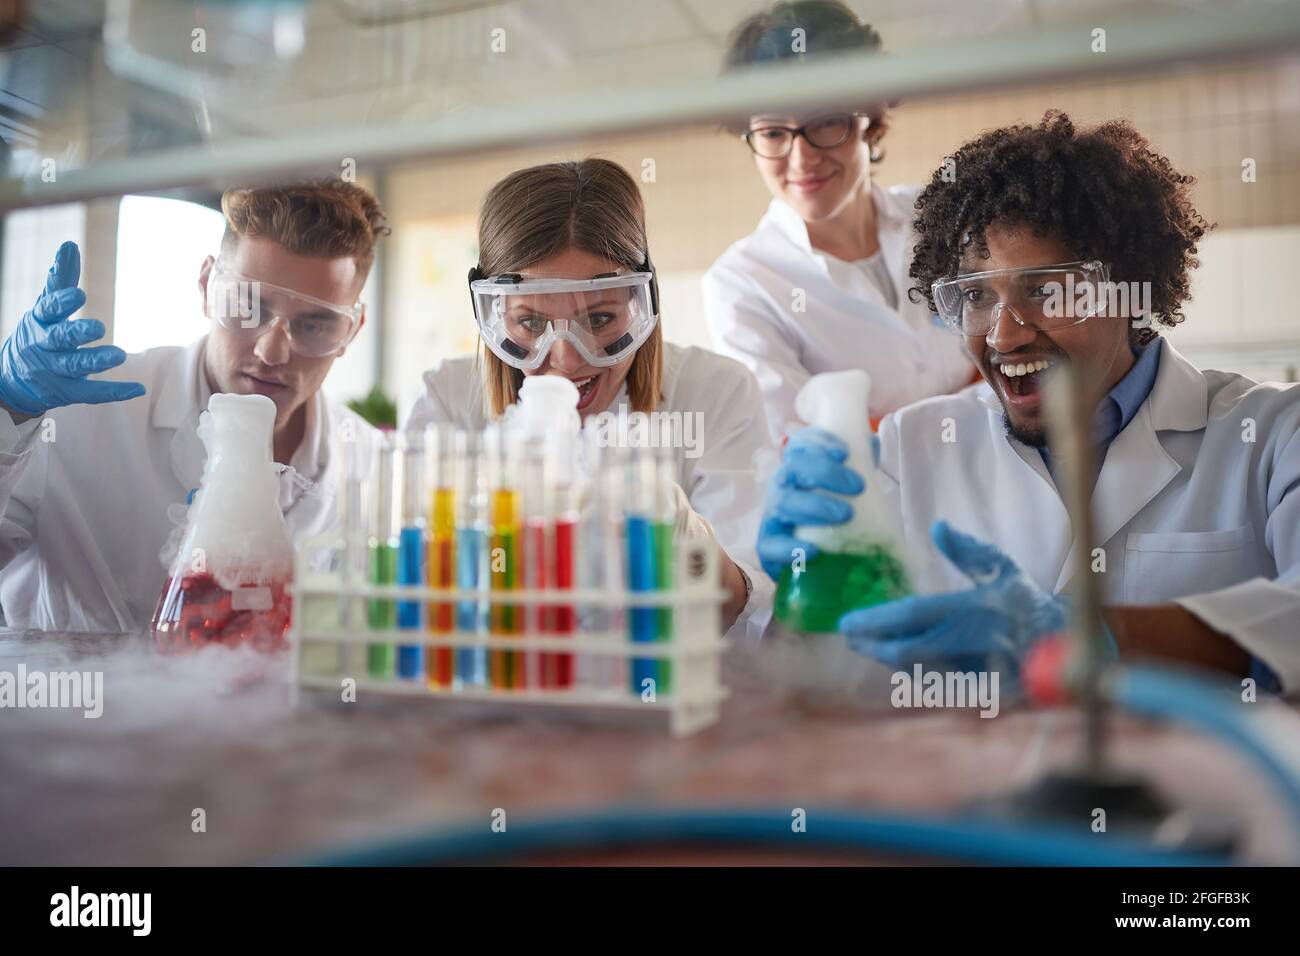 Young chemistry students in a laboratory relaxed atmosphere are excited while watching colorful chemical reactions. Science, chemistry, lab, people Stock Photo